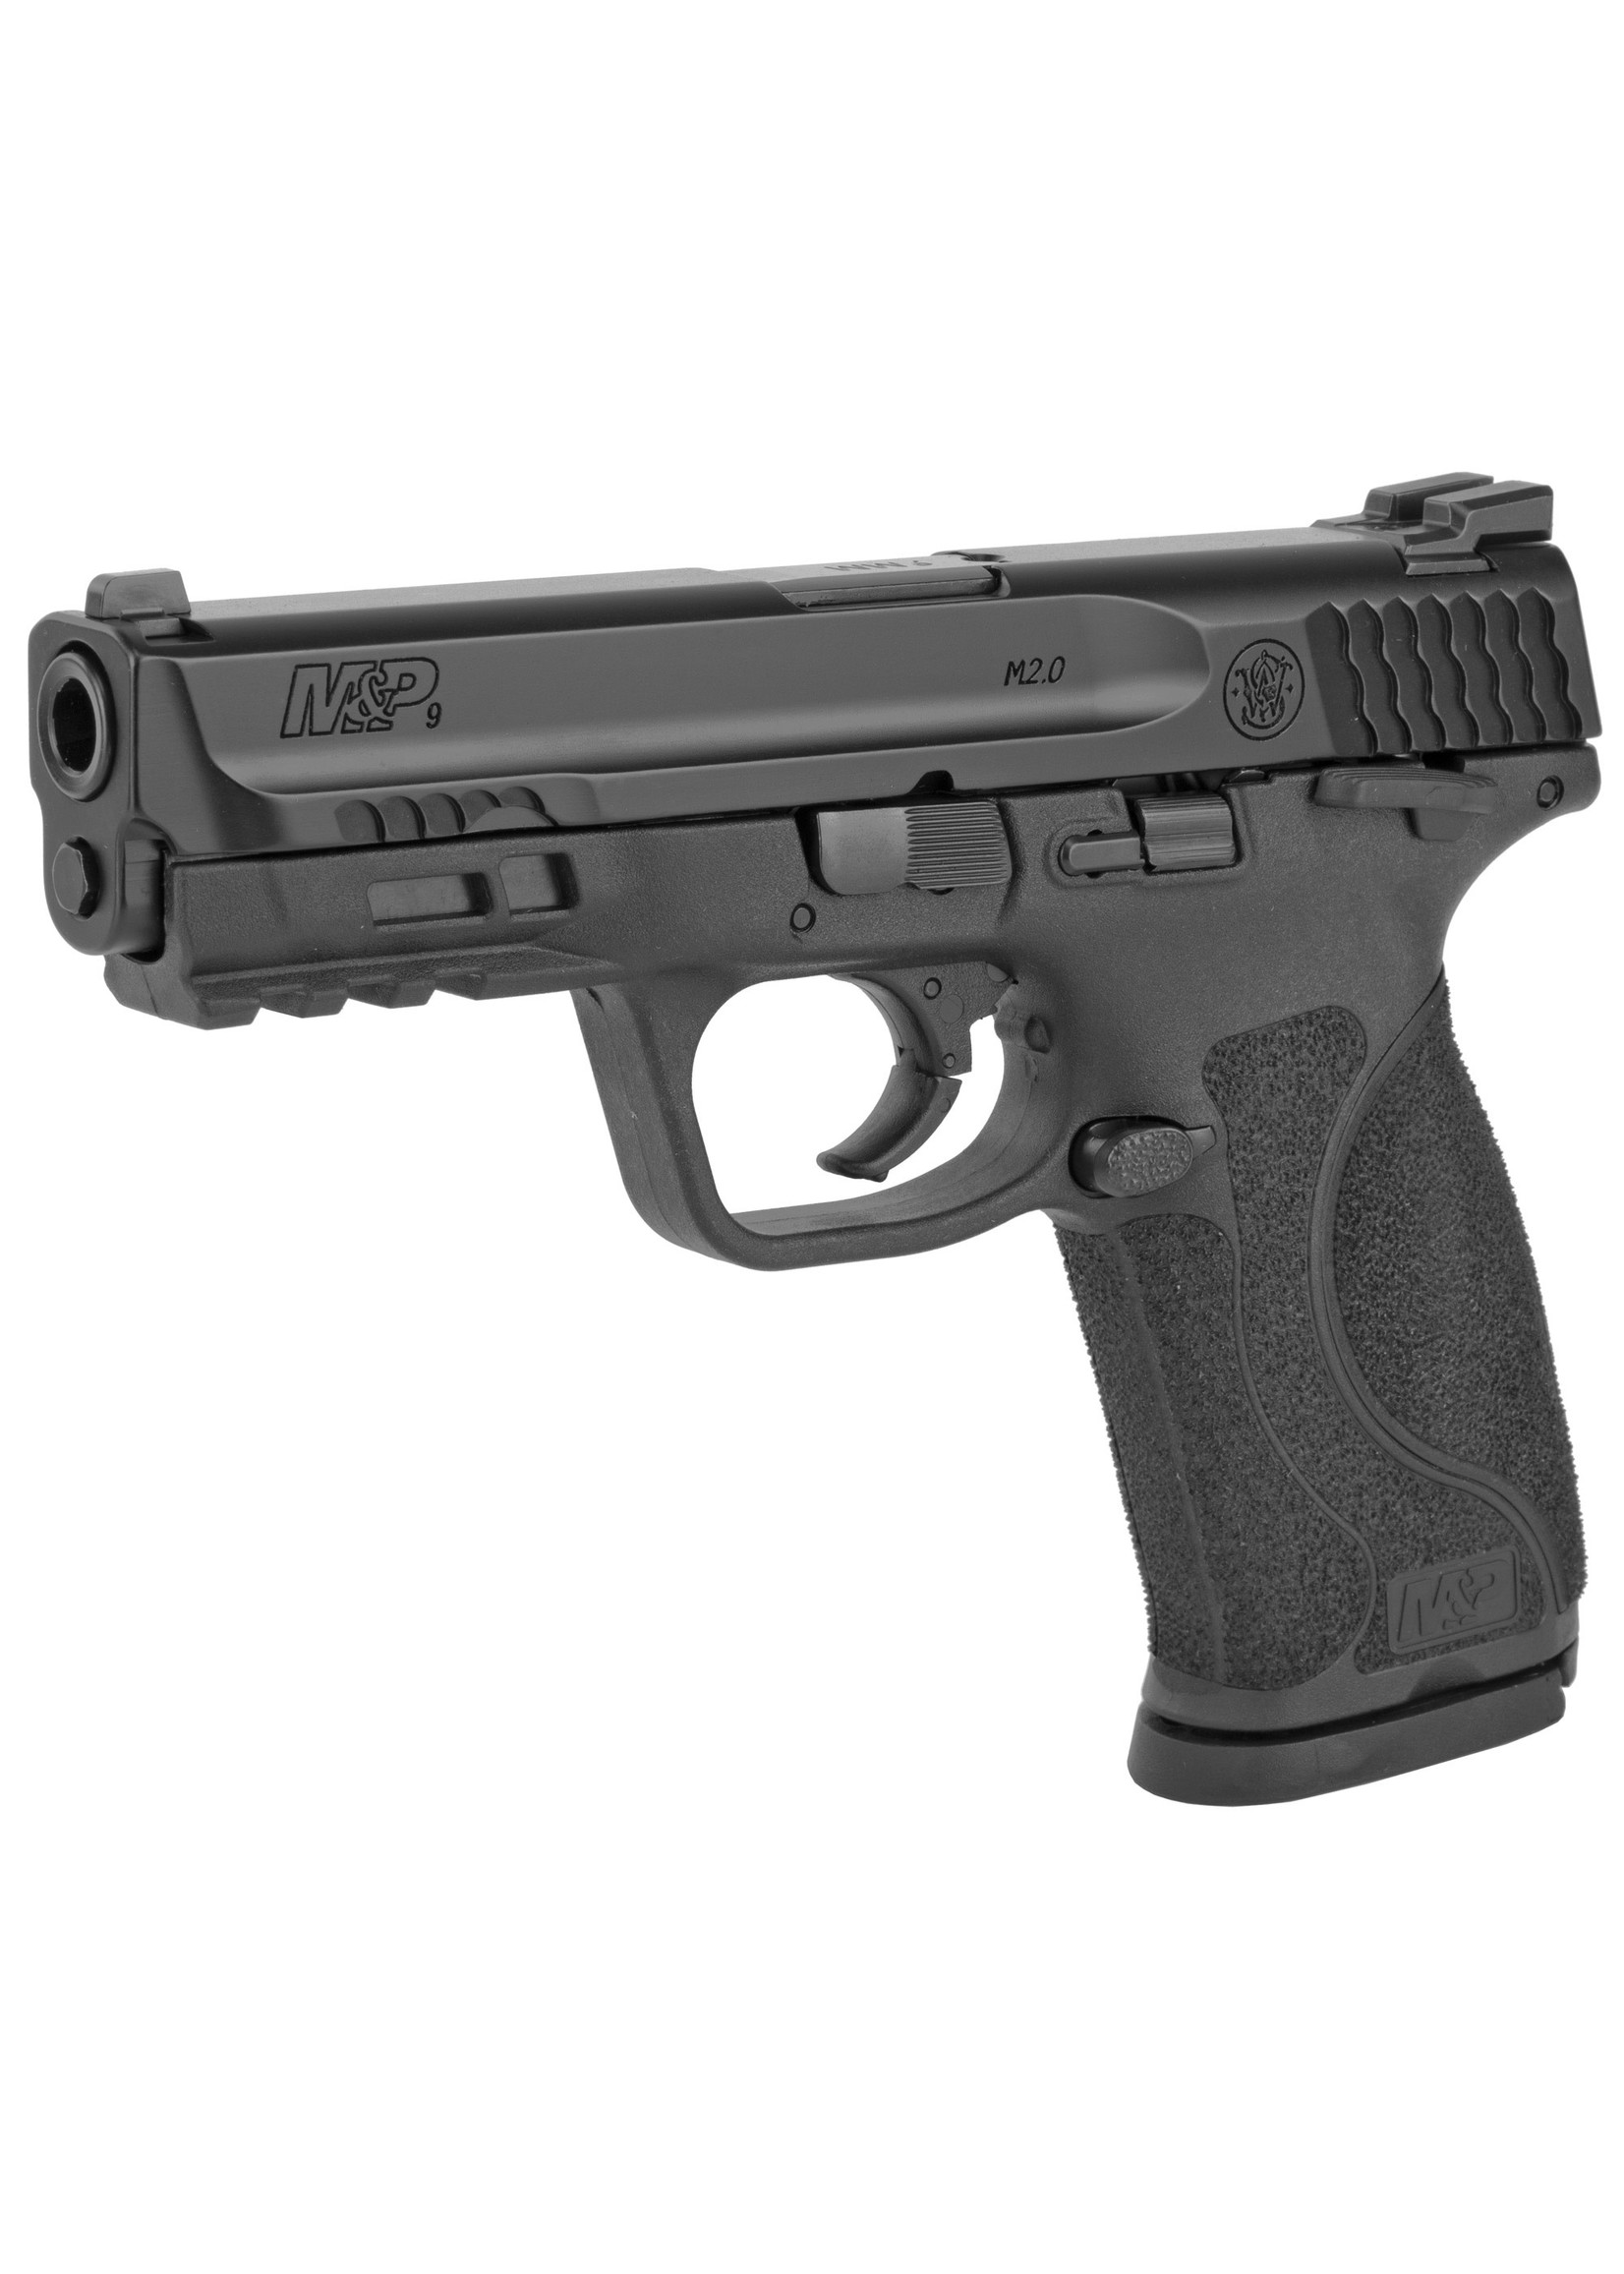 Smith and Wesson (S&W) Smith & Wesson M&P9 M2.0 Pistol,  9mm,  4.25",  black, 17+1, With Manual Safety